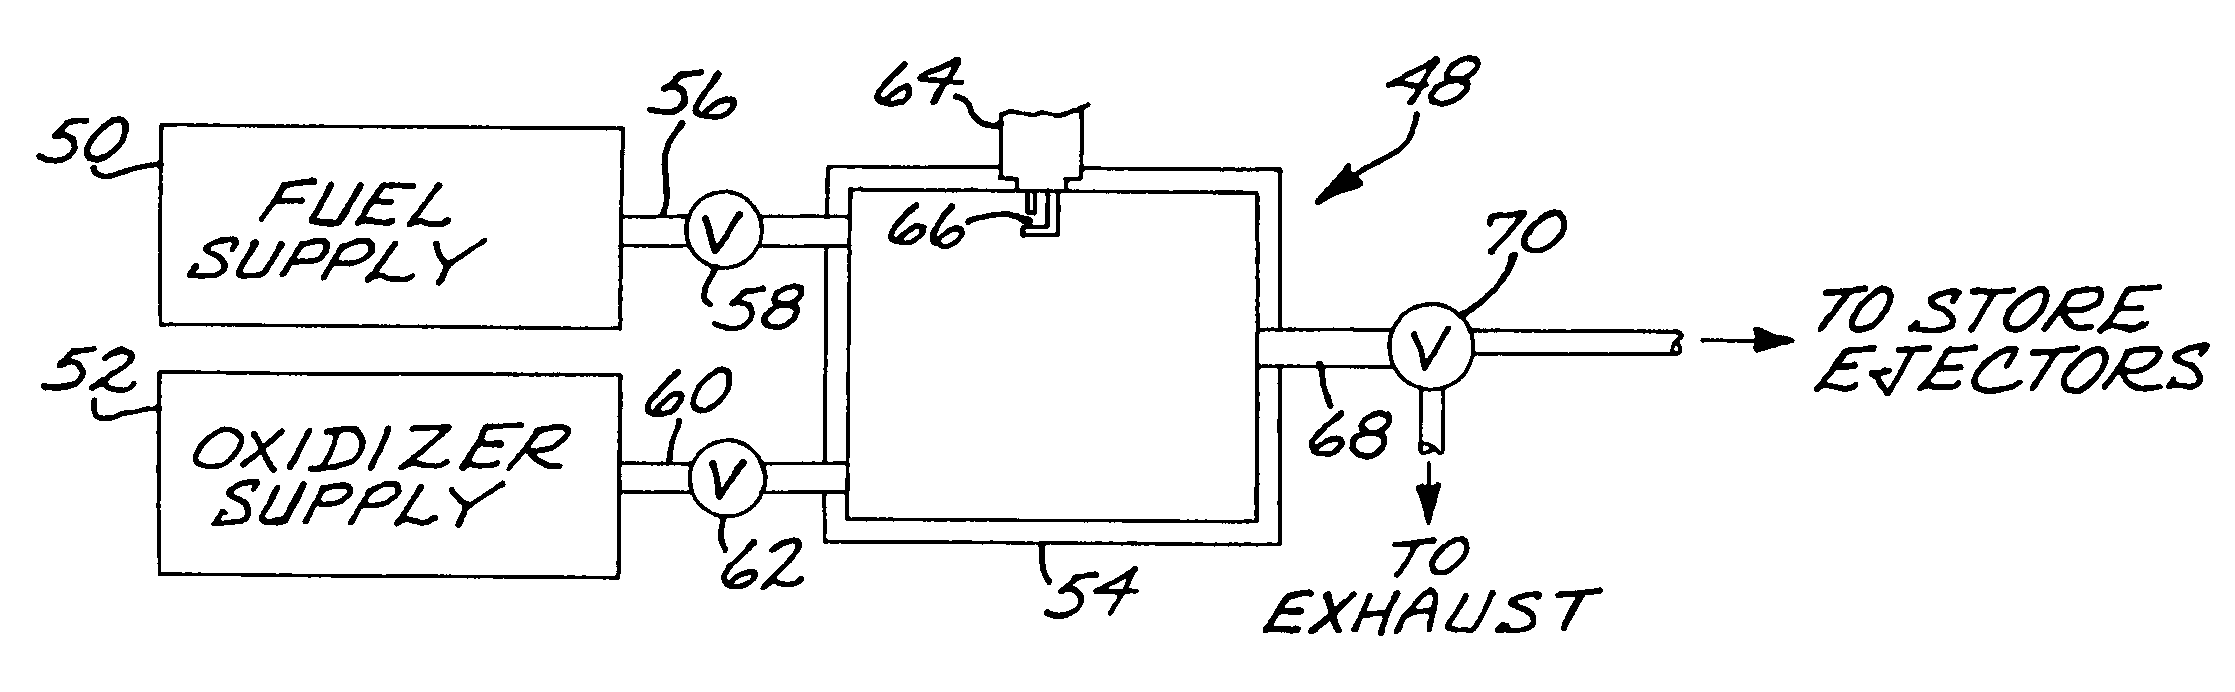 Store ejection system utilizing a mixed fuel and oxidizer in a power source